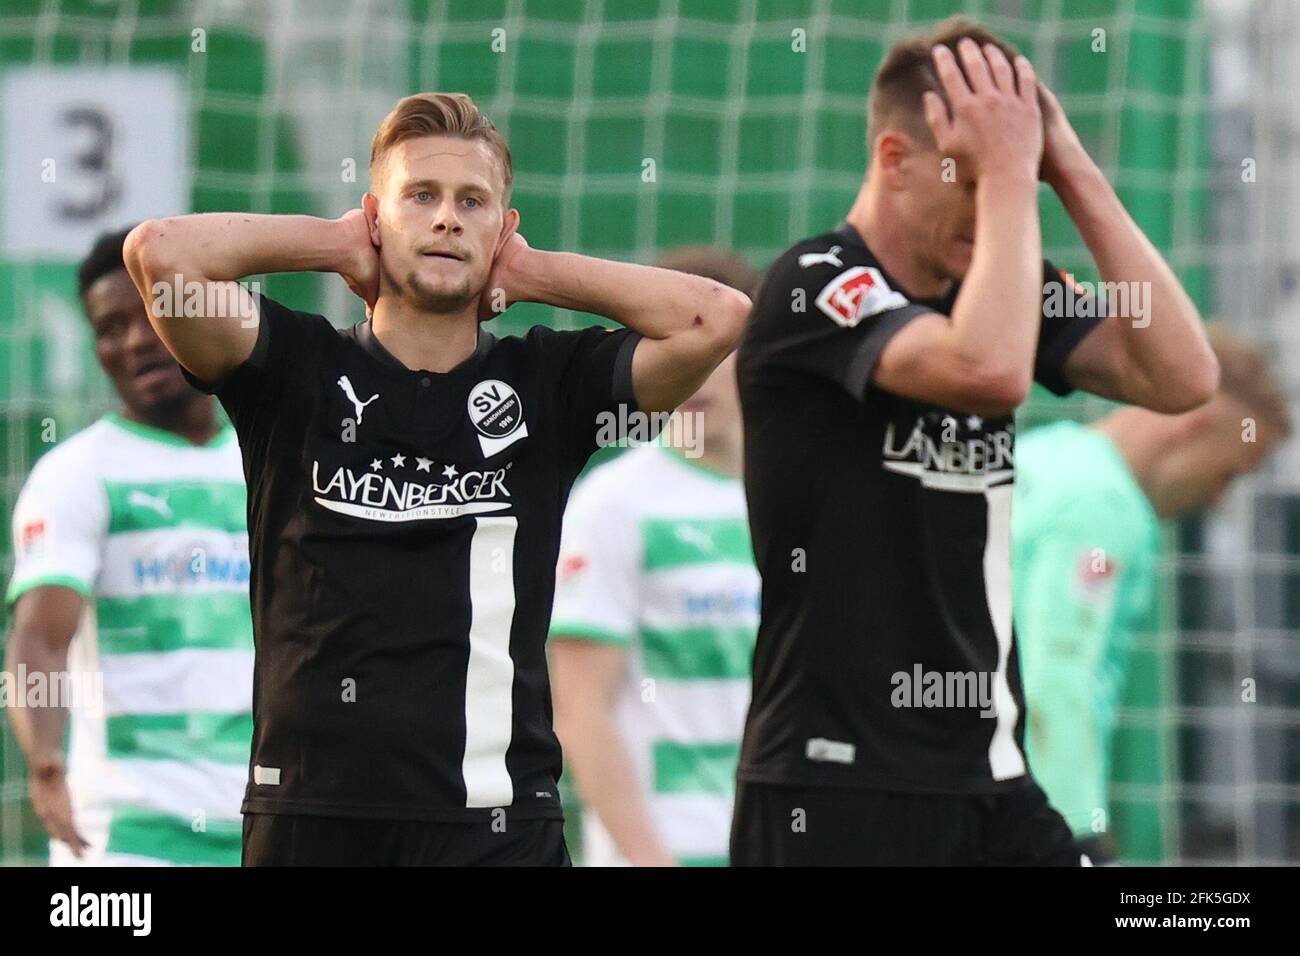 28 April 2021, Bavaria, Fürth: Football: 2. Bundesliga, SpVgg Greuther Fürth - SV Sandhausen, Matchday 28, at Sportpark Ronhof Thomas Sommer. Kevin Behrens (l) and Emanuel Taffertshofer of SV Sandhausen react to the match delay. Photo: Daniel Karmann/dpa - IMPORTANT NOTE: In accordance with the regulations of the DFL Deutsche Fußball Liga and/or the DFB Deutscher Fußball-Bund, it is prohibited to use or have used photographs taken in the stadium and/or of the match in the form of sequence pictures and/or video-like photo series. Stock Photo